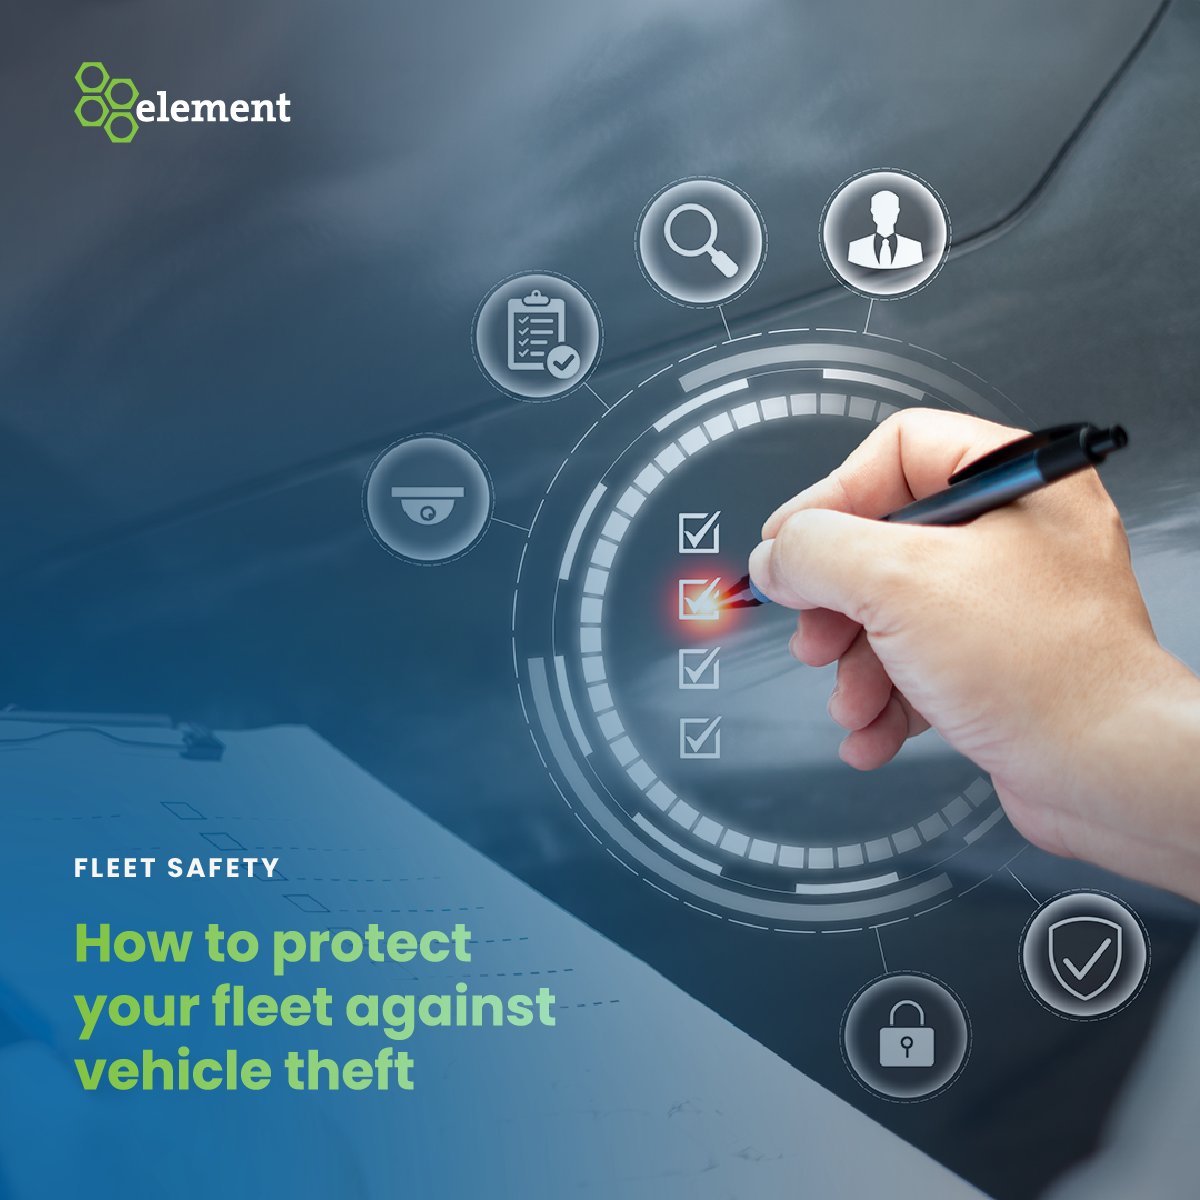 ⚠️ With the rise of vehicle theft in North America, you can elevate your commercial fleet's security with these five essential procedures.   
  
Learn more @ElementFleet: bit.ly/3N85SoE

#ElementDrivesResults #FleetManagement #FleetSafety #VehicleTheft #PreventCarTheft